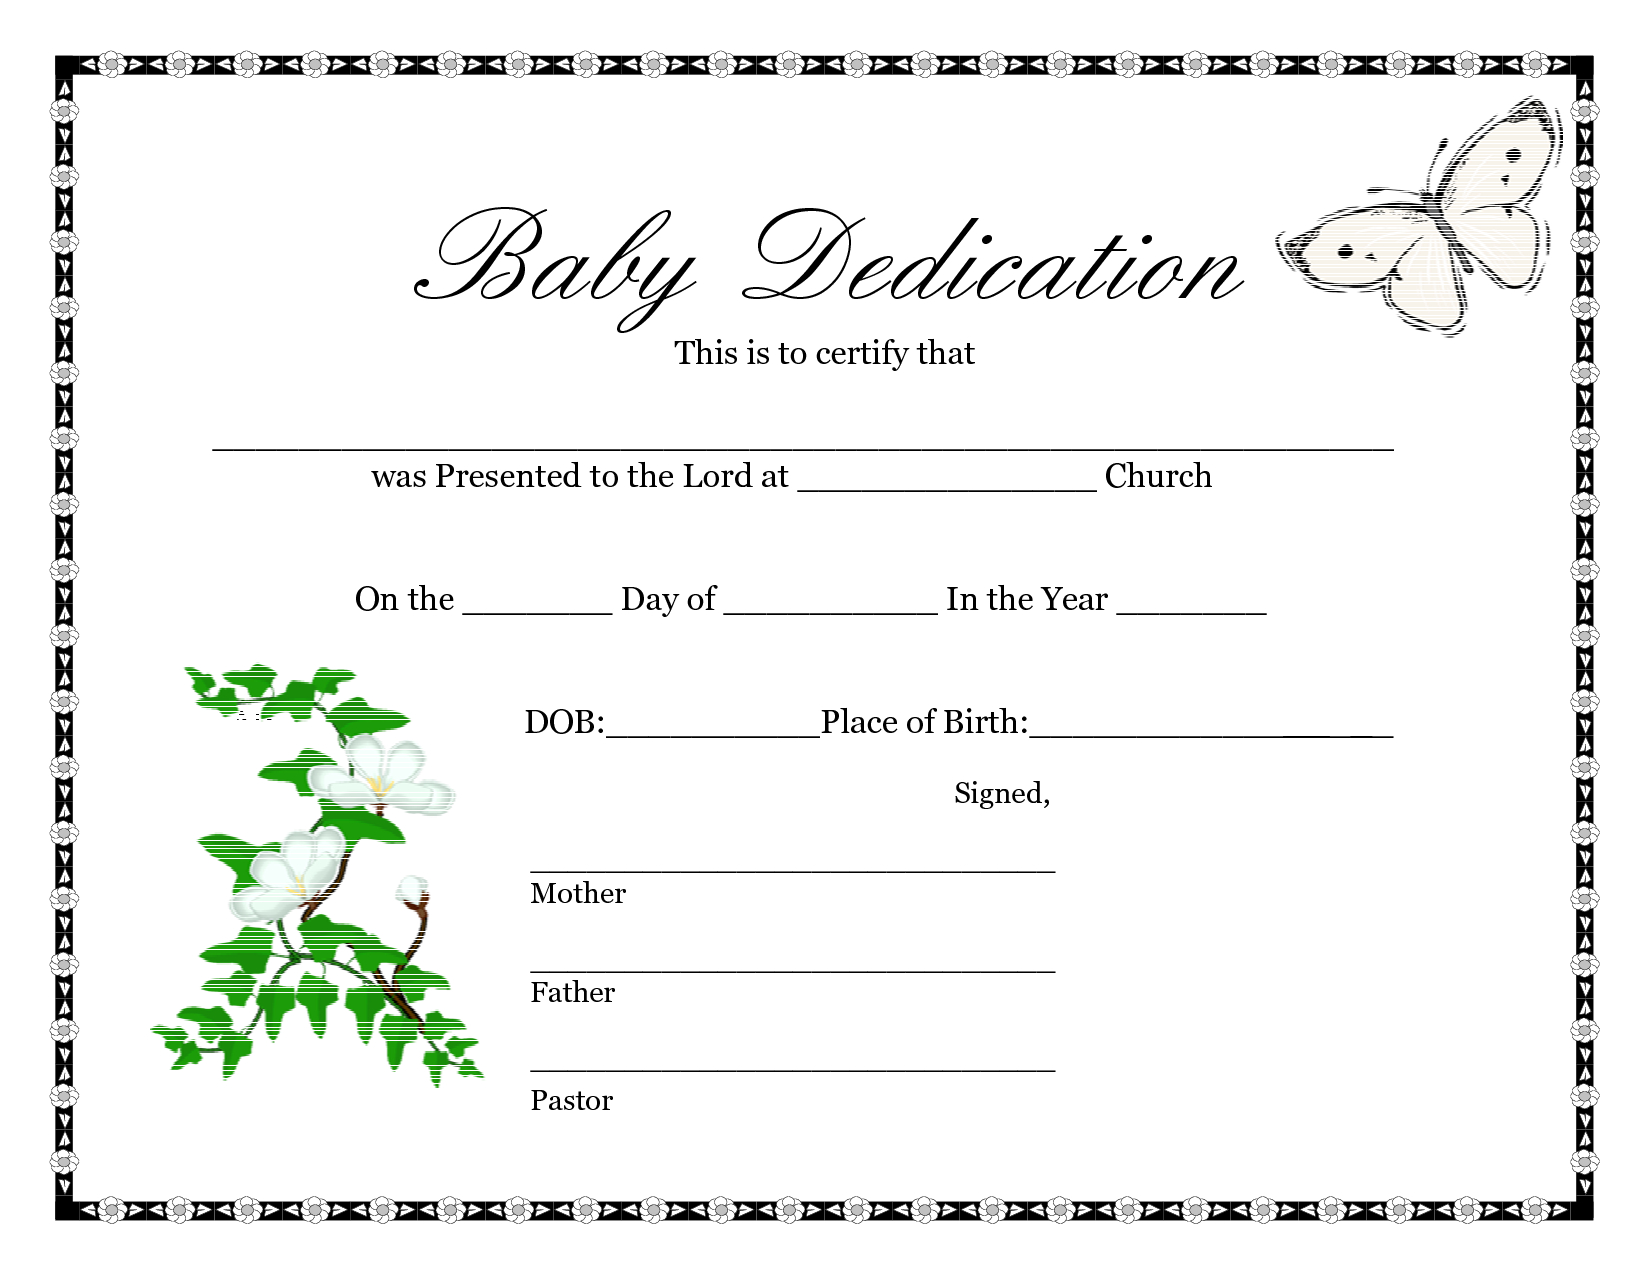 Downloadable Blank Birth Certificate Template Sample : V M D With Regard To Birth Certificate Templates For Word